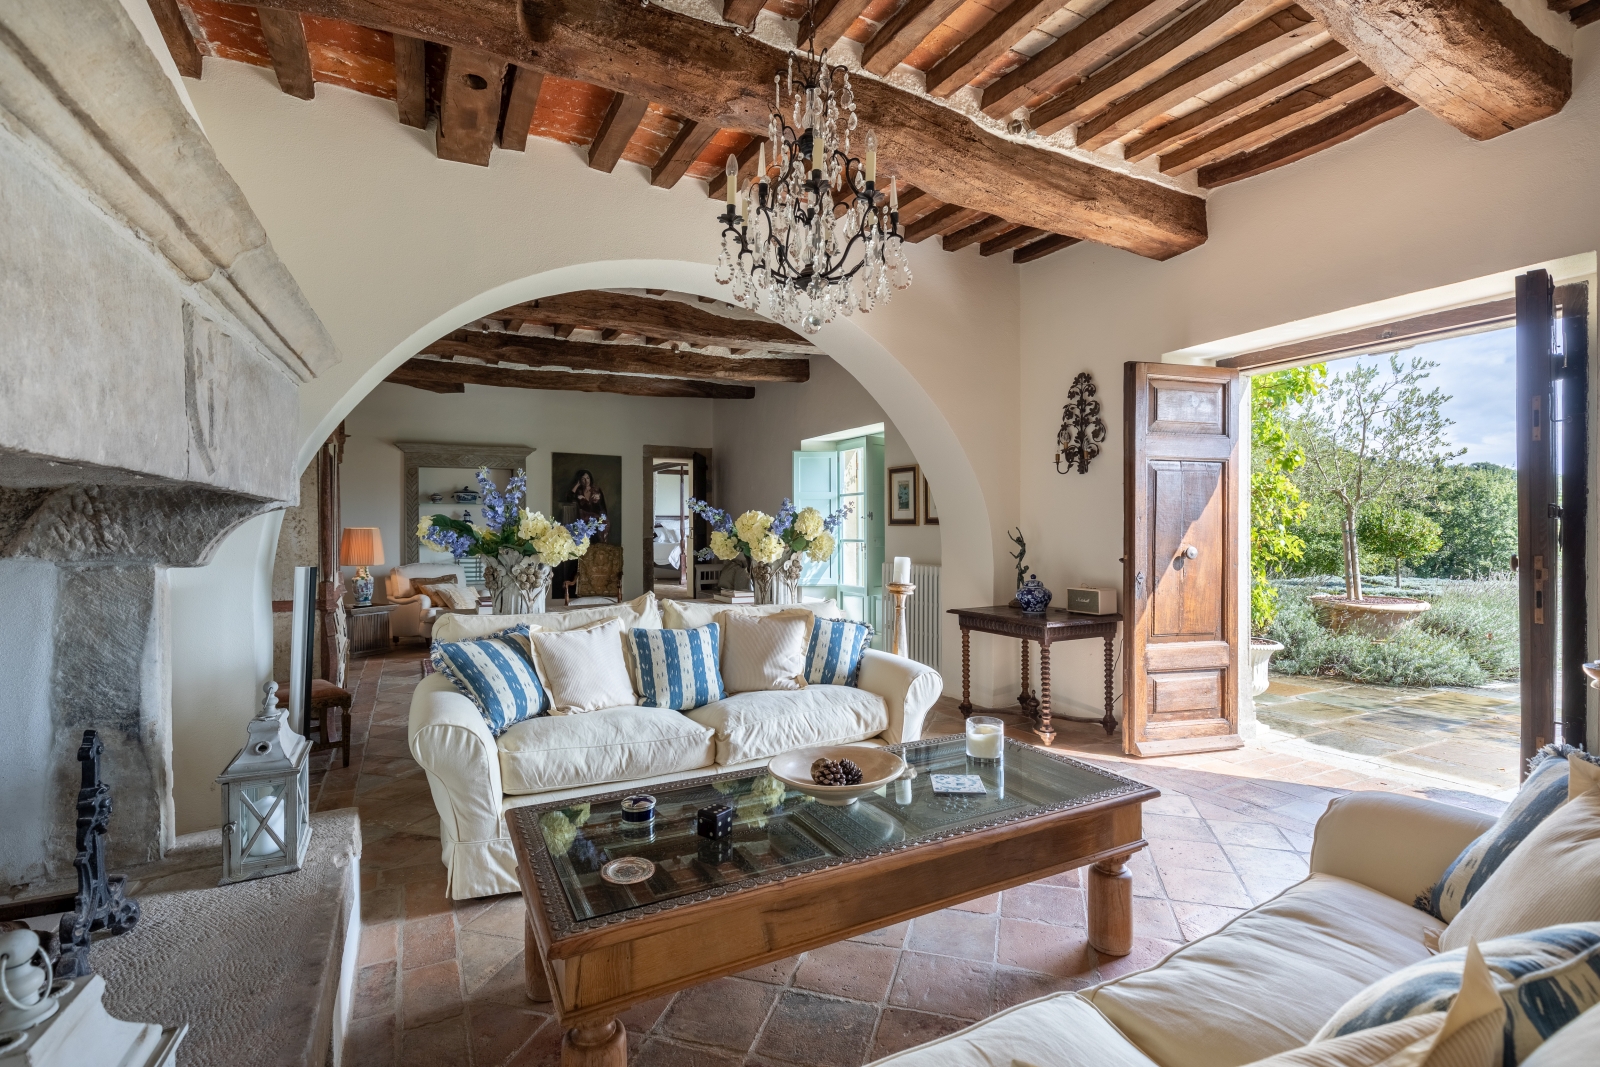 Lounge with sofas, coffee table, fireplace, flowers, chandelier and doors to garden at Tenuta Cantata in Tuscany, Italy